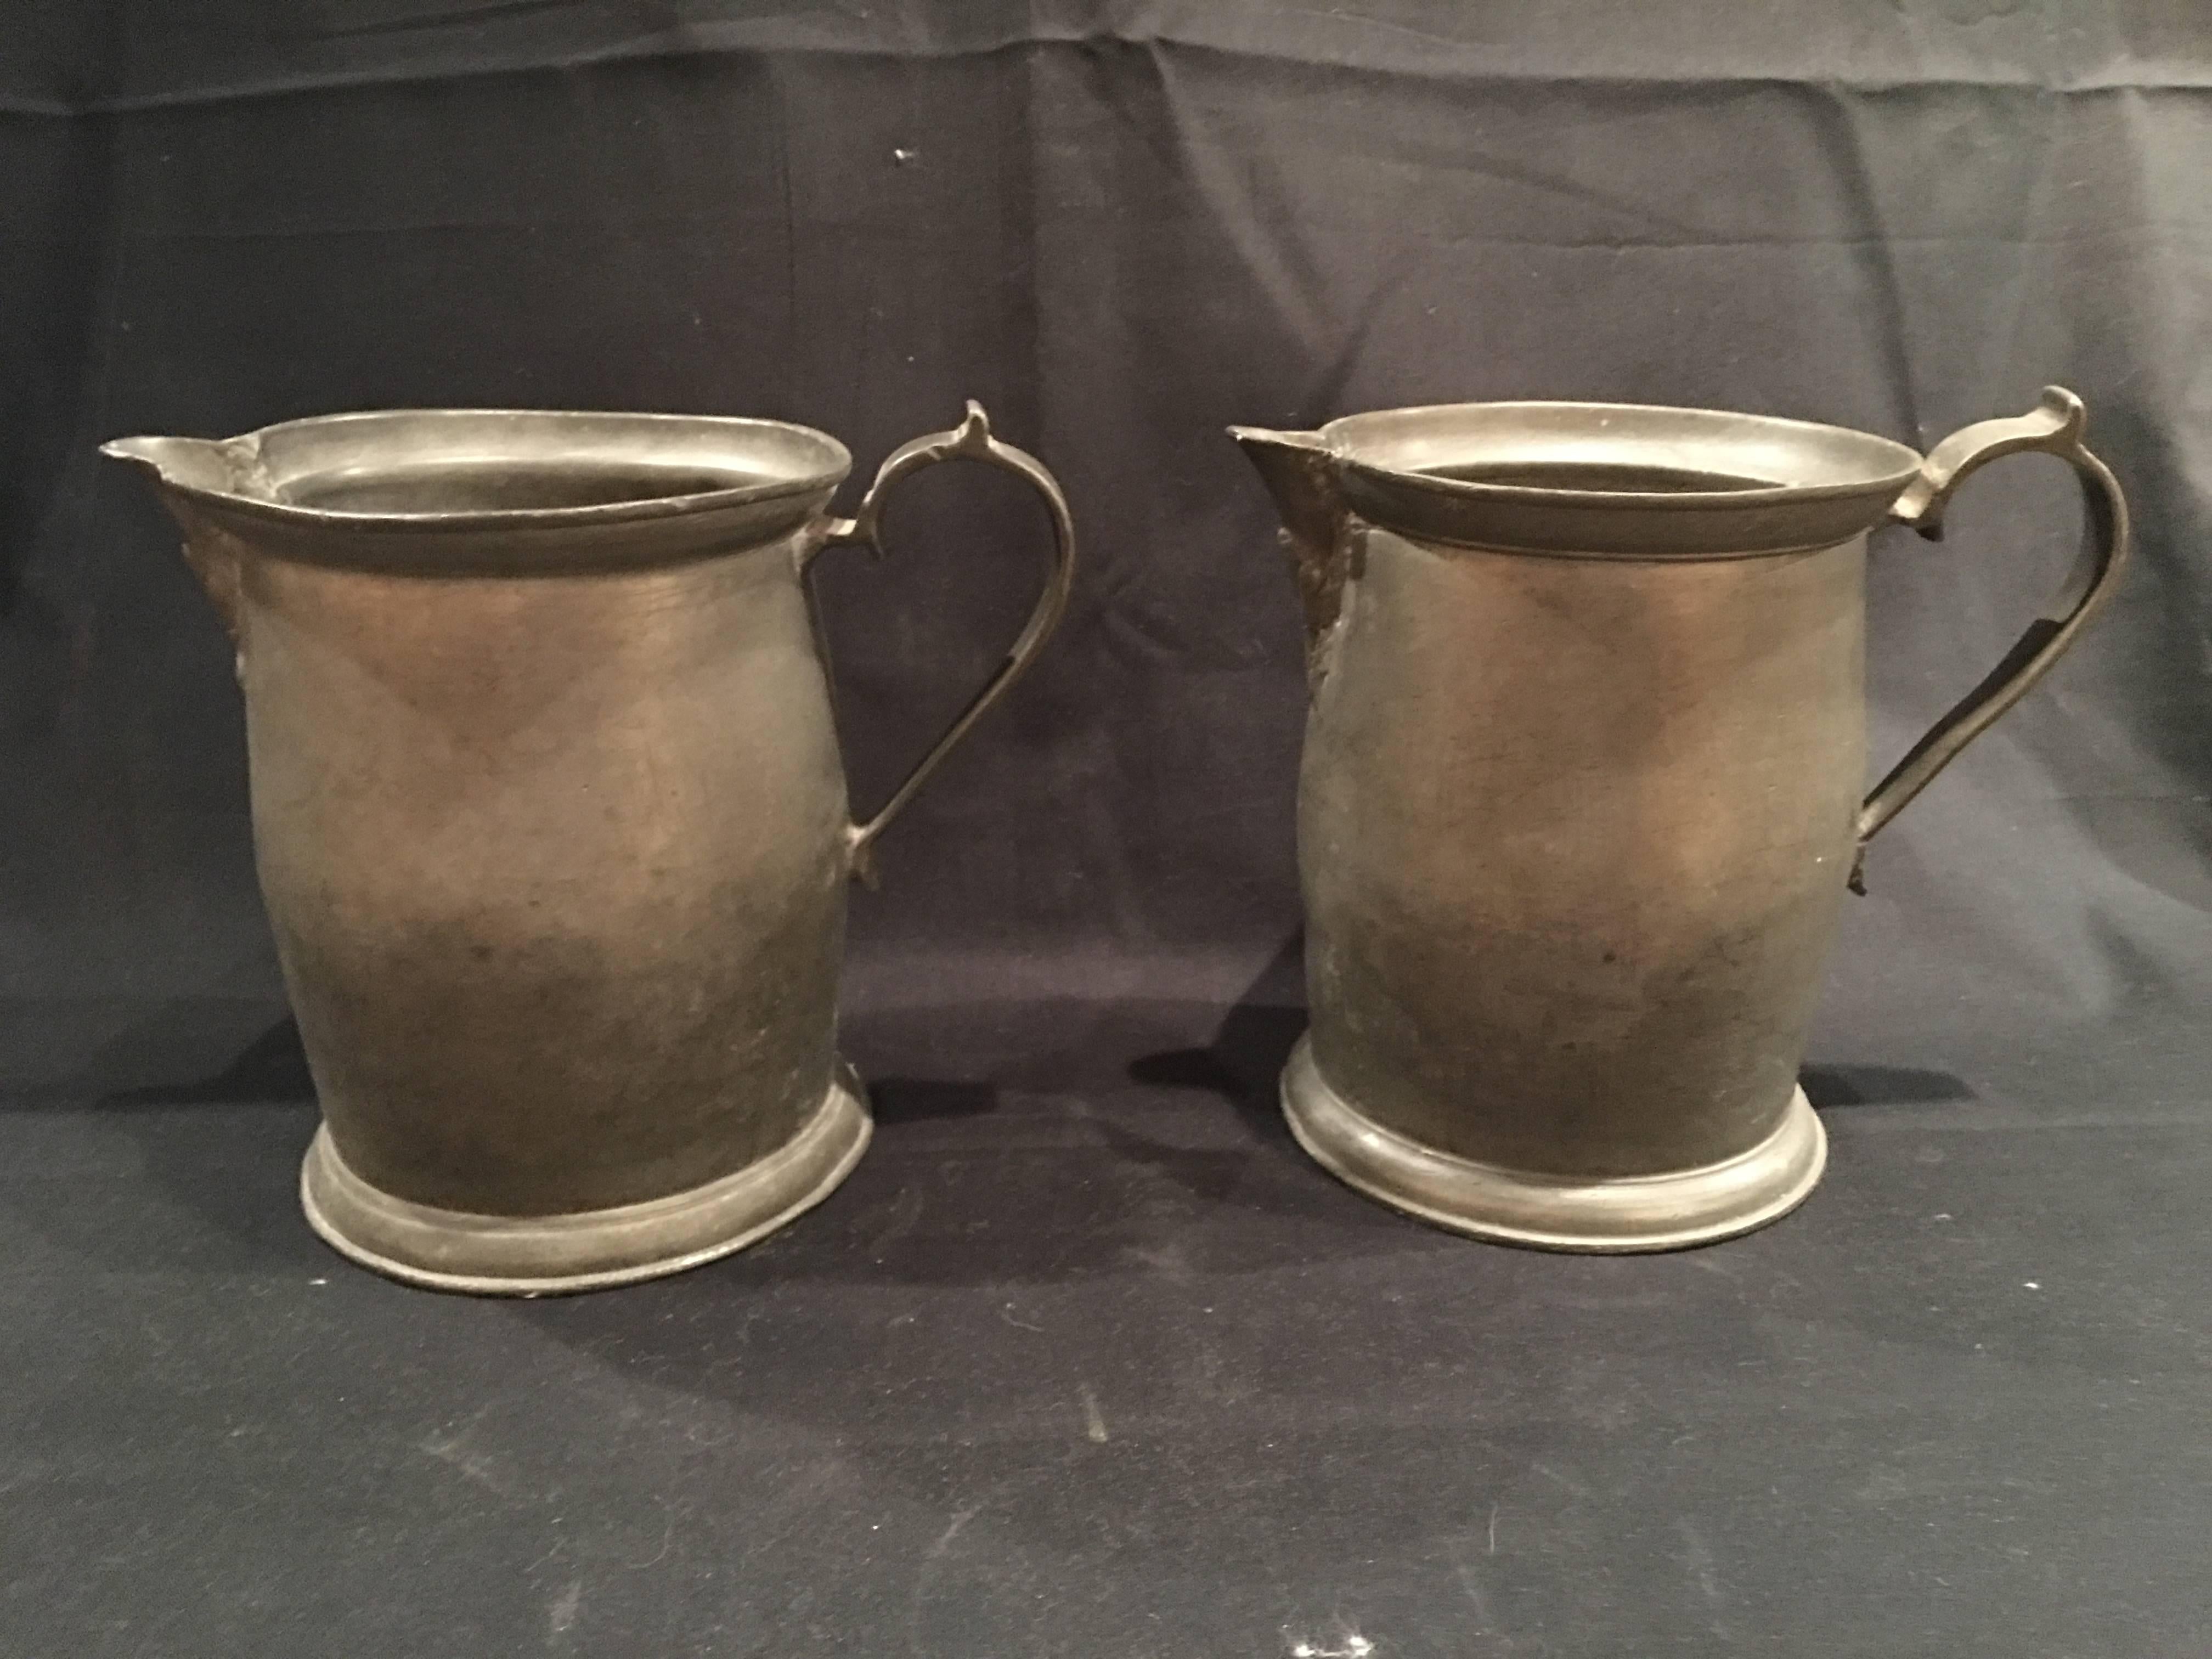 English pair of Pewter mugs or cups with handles, 19th century.